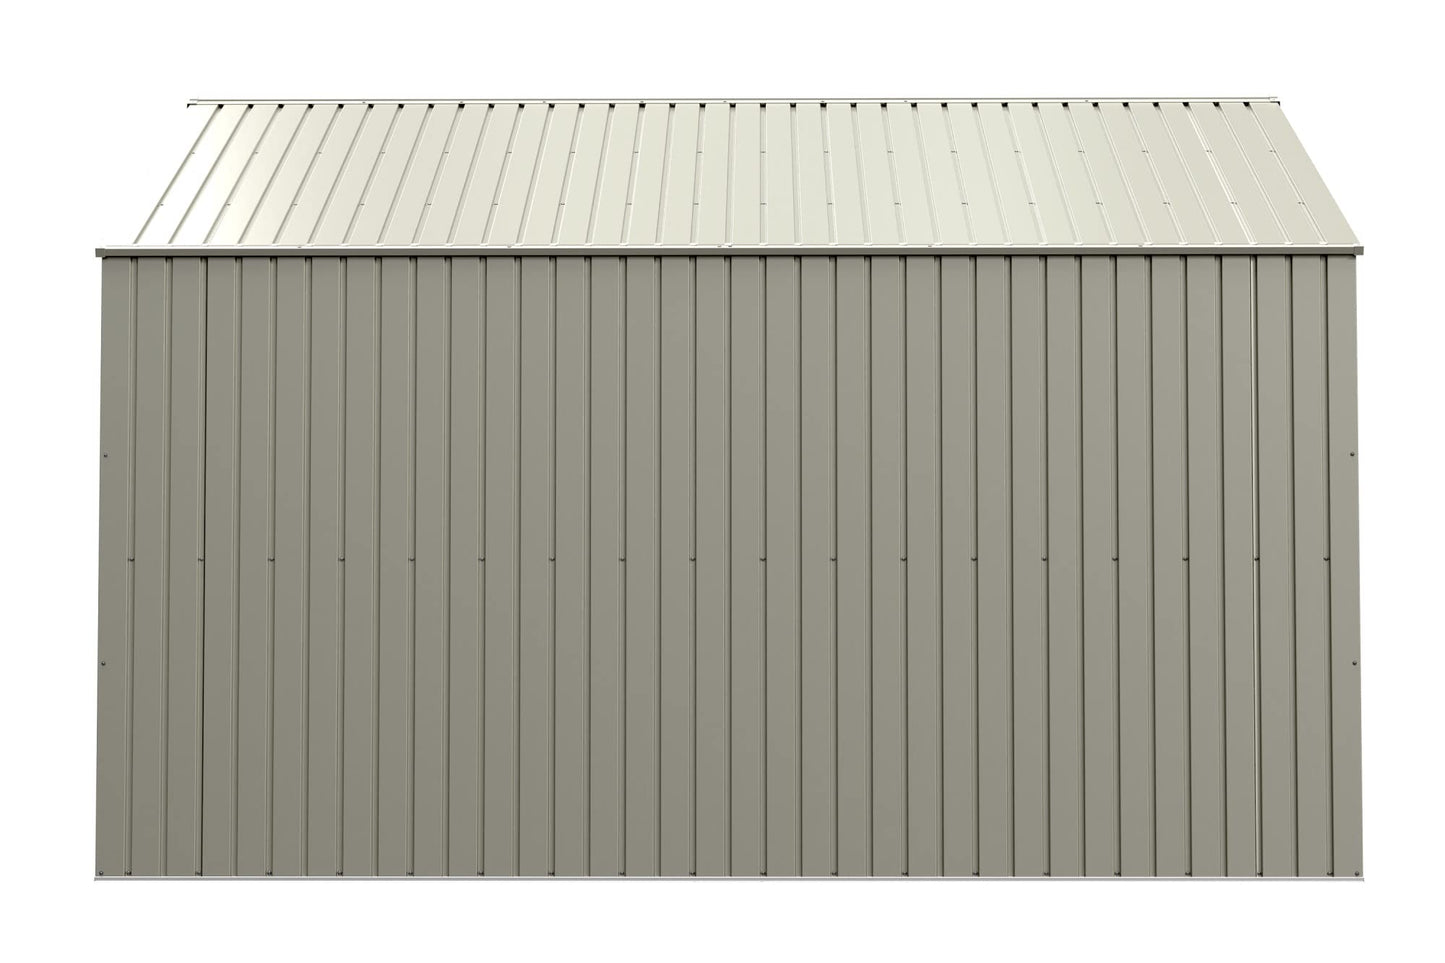 Arrow Shed Elite 12' x 12' Outdoor Lockable Gable Roof Steel Storage Shed Building, Cool Grey